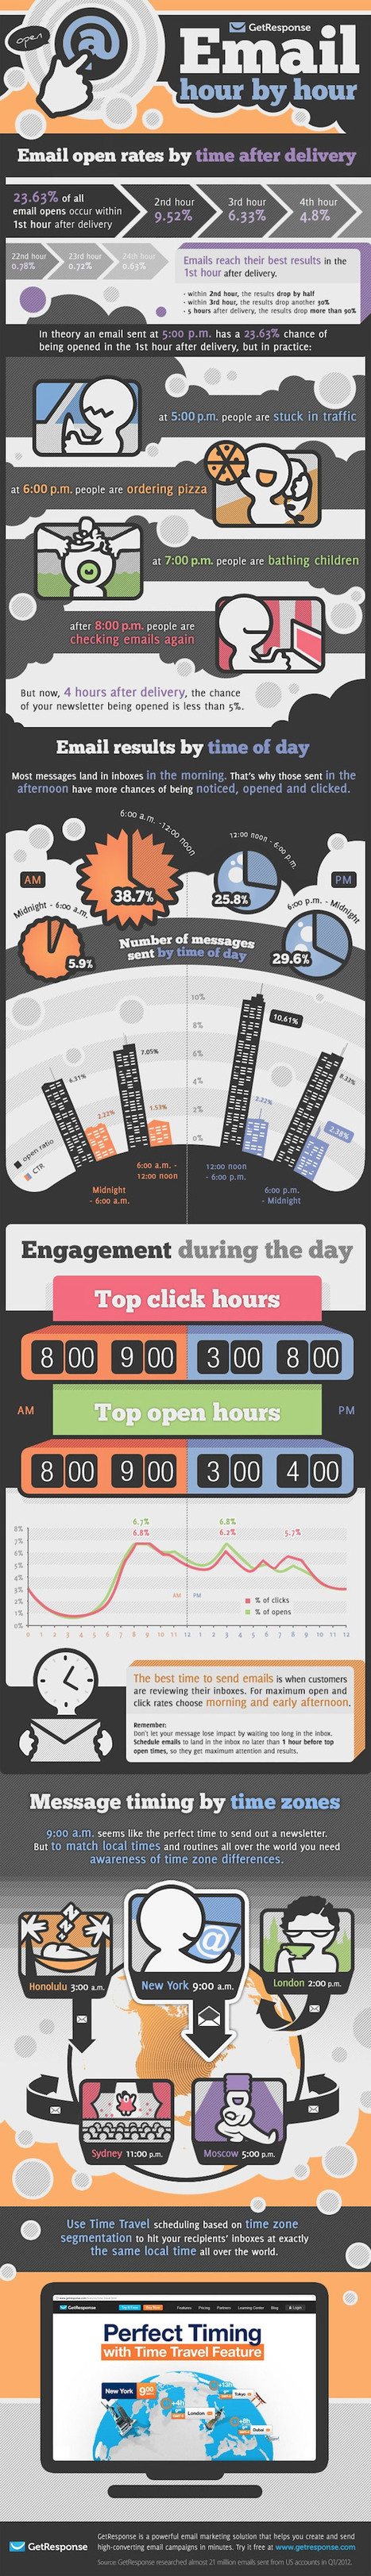 The Best Time Of The Day To Send Emails [INFOGRAPHIC] | Marketing_me | Scoop.it